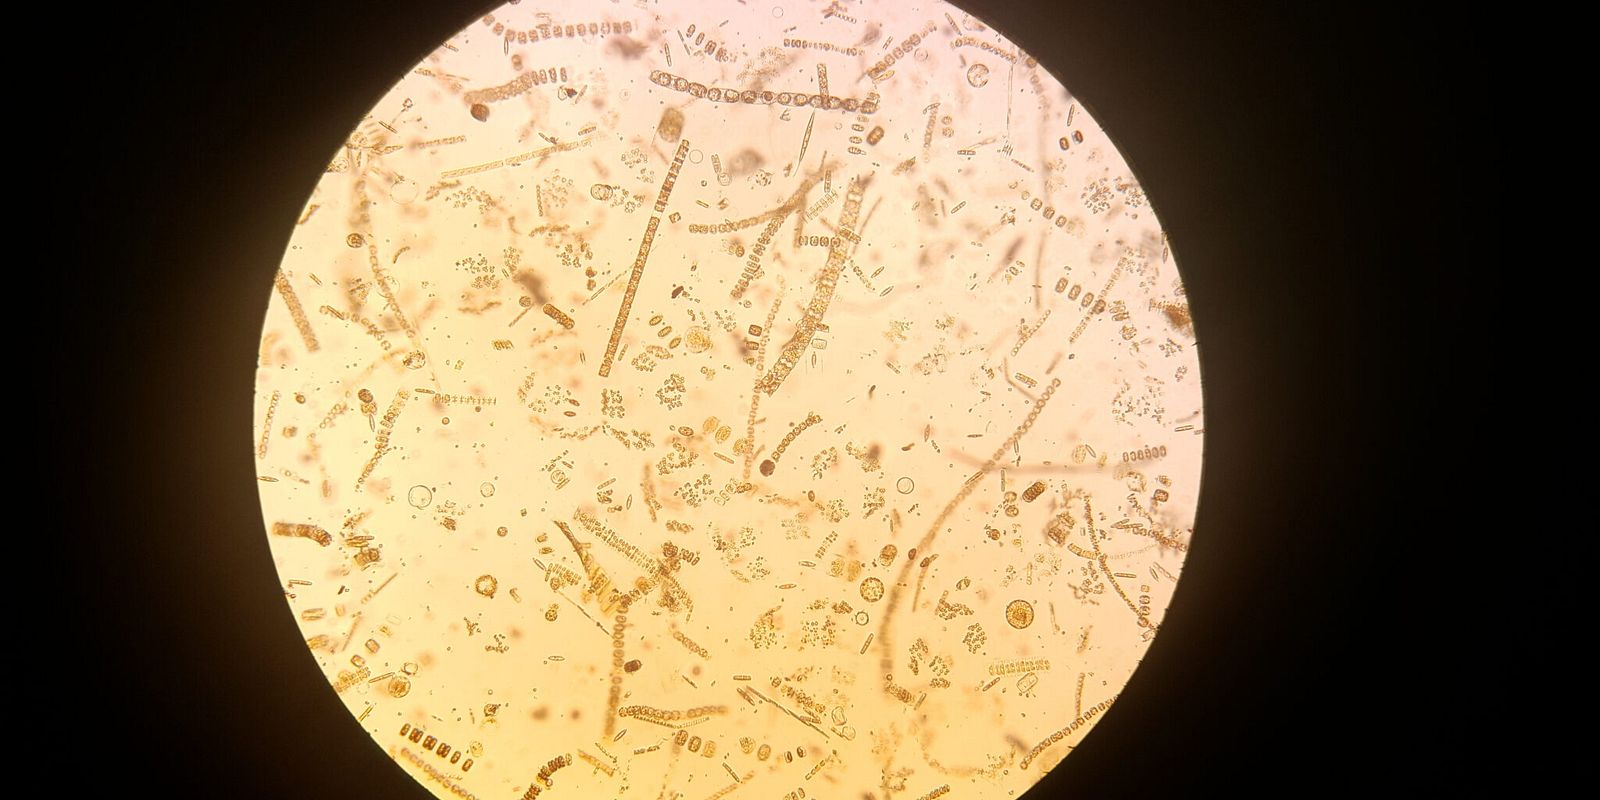 Through a microscope, the stunning diversity of phytoplankton becomes obvious. These specimens were sampled in Van Mijenfjorden during the spring bloom (Photo: Ane Cecilie Kvernvik)